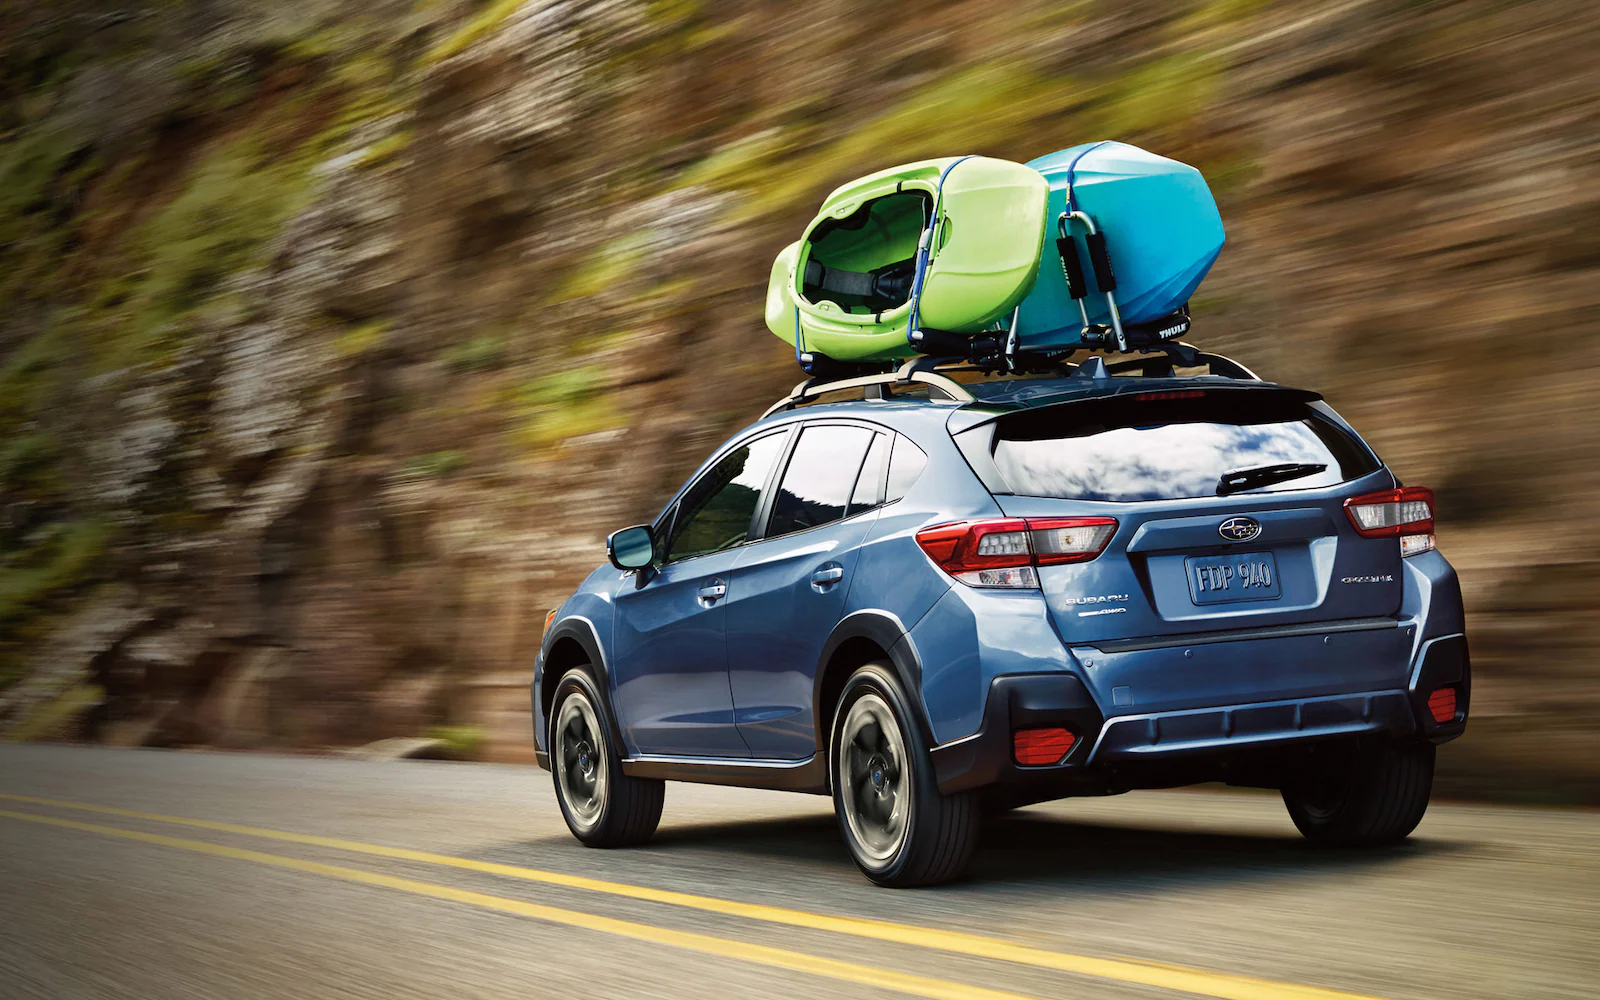 A blue Subaru Crosstrek with two kayaks on roof driving on a mountain road